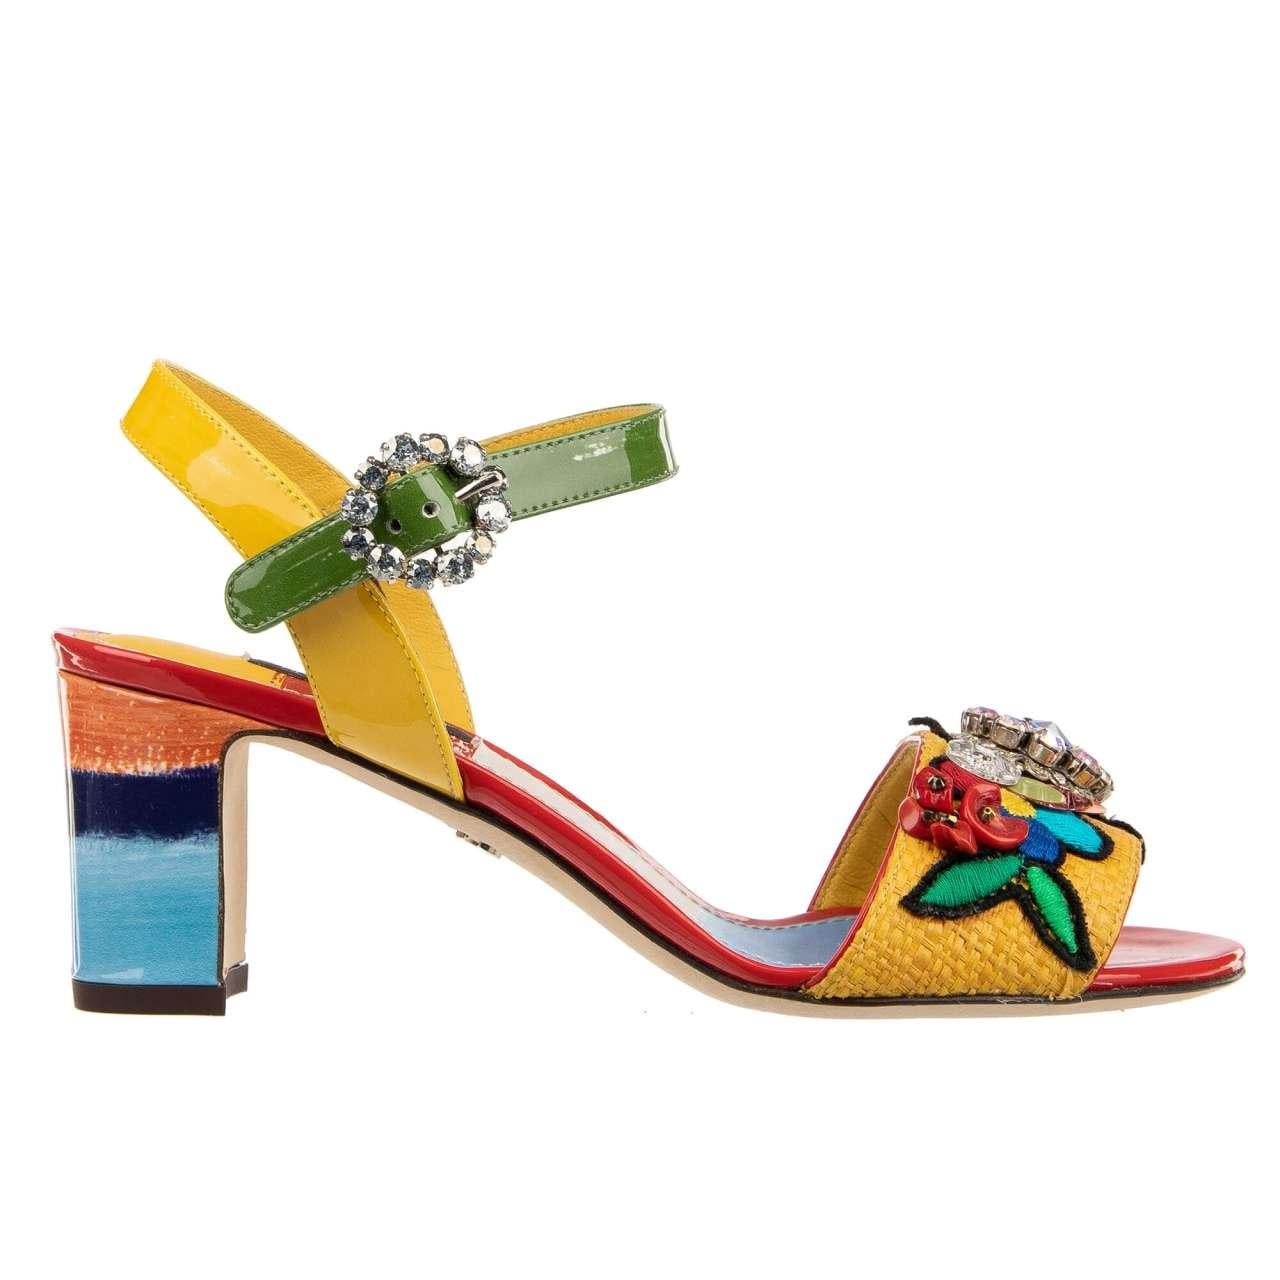 - Patent Leather Sandals KEIRA embellished with raffia, crystal brooch and embroidery in red, yellow, blue and green by DOLCE & GABBANA - MADE IN ITALY - RUNWAY - Dolce & Gabbana Fashion Show - New with Box - Model: CR0645-AU659-HHR41 - Material: